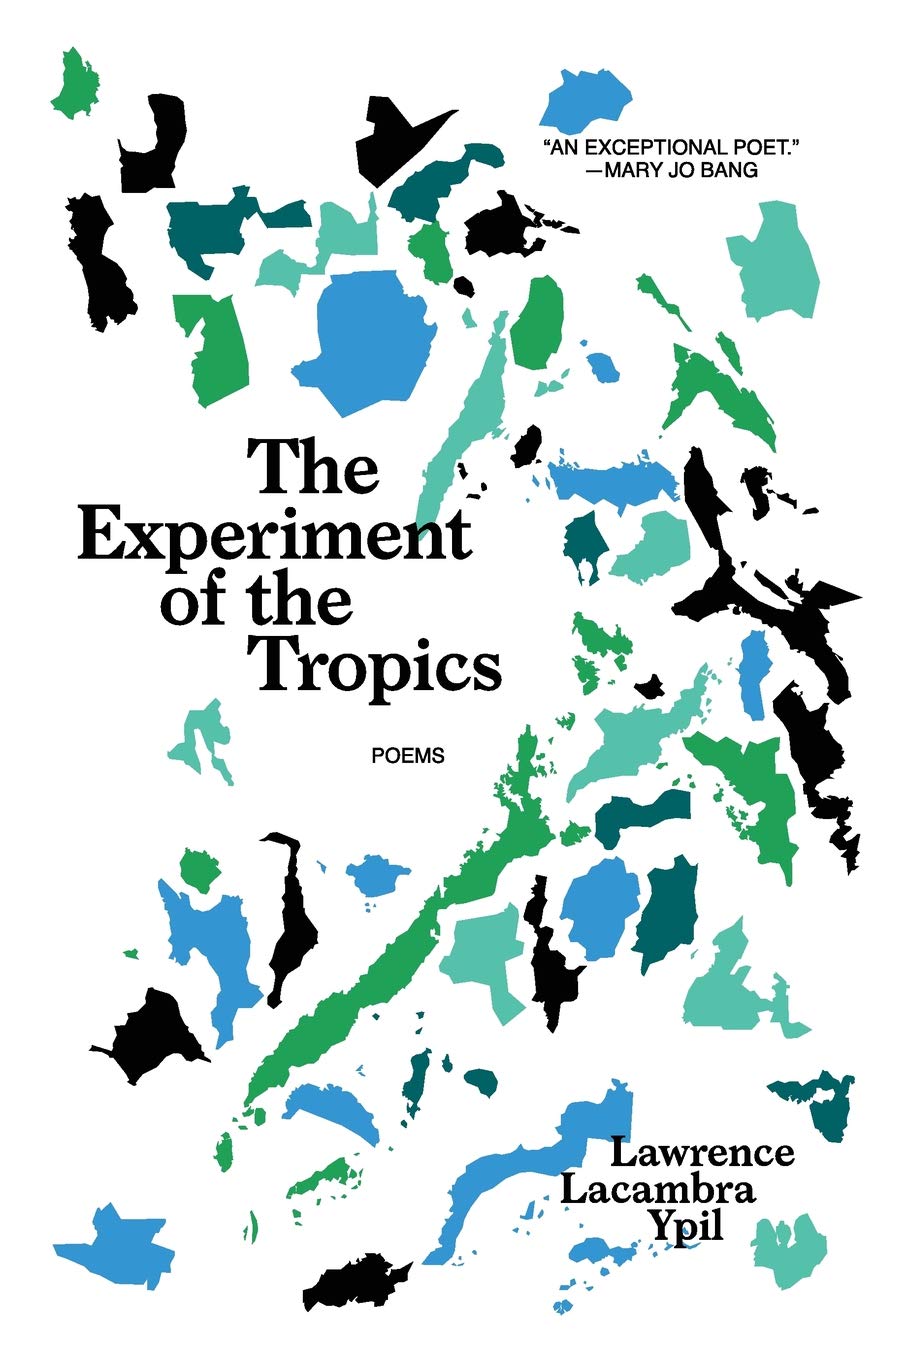 Cover of the book, The Experiment of the Tropics. Poems by Lawrence Lacambra Ypil. Islands of the Philippine archipelago, colored blue, green, and black, are jumbled like puzzle pieces. Top right corner, quote, an exceptional poet, unquote, by Mary Jo Bang.